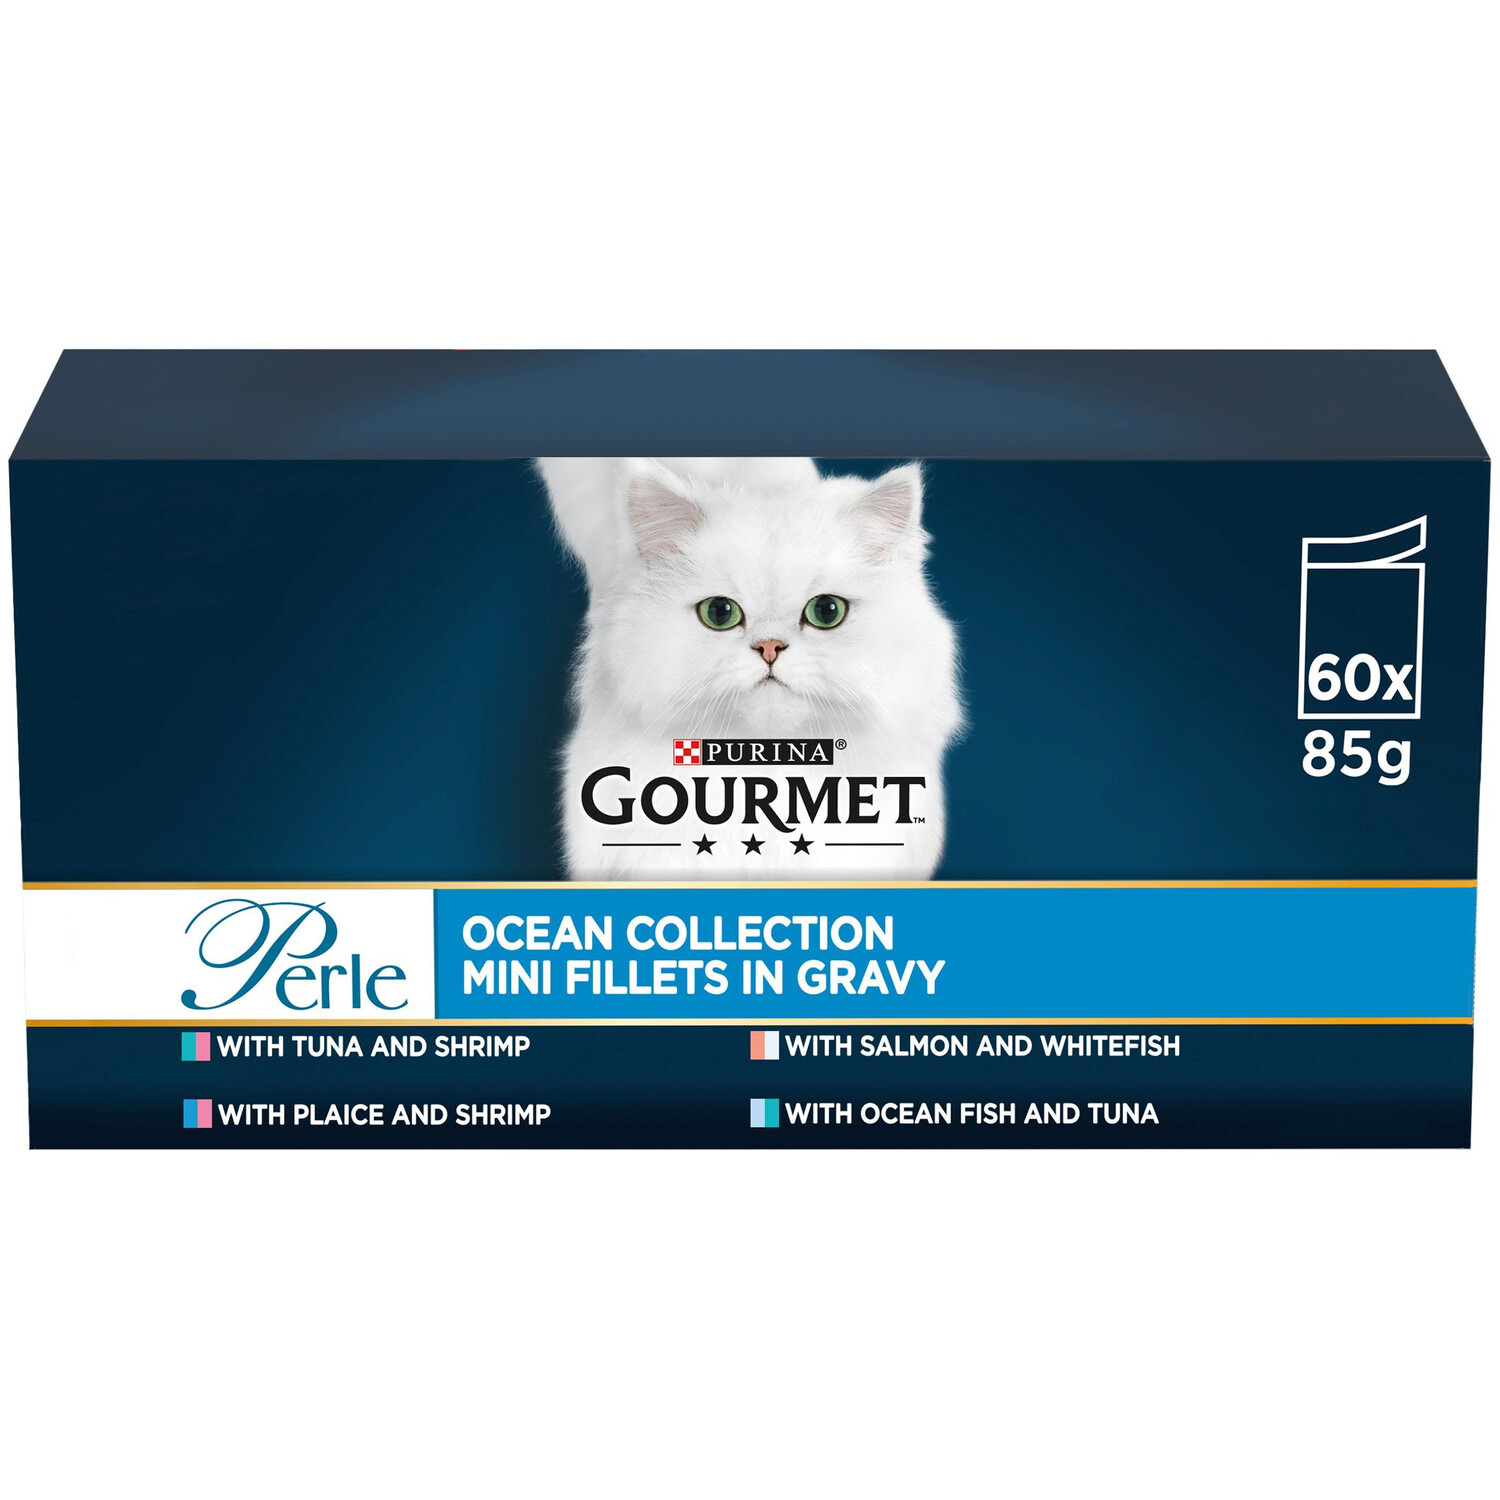 Purina Gourmet Perle Ocean Collection Cat Food Pouches 56g x 60 Pack Image